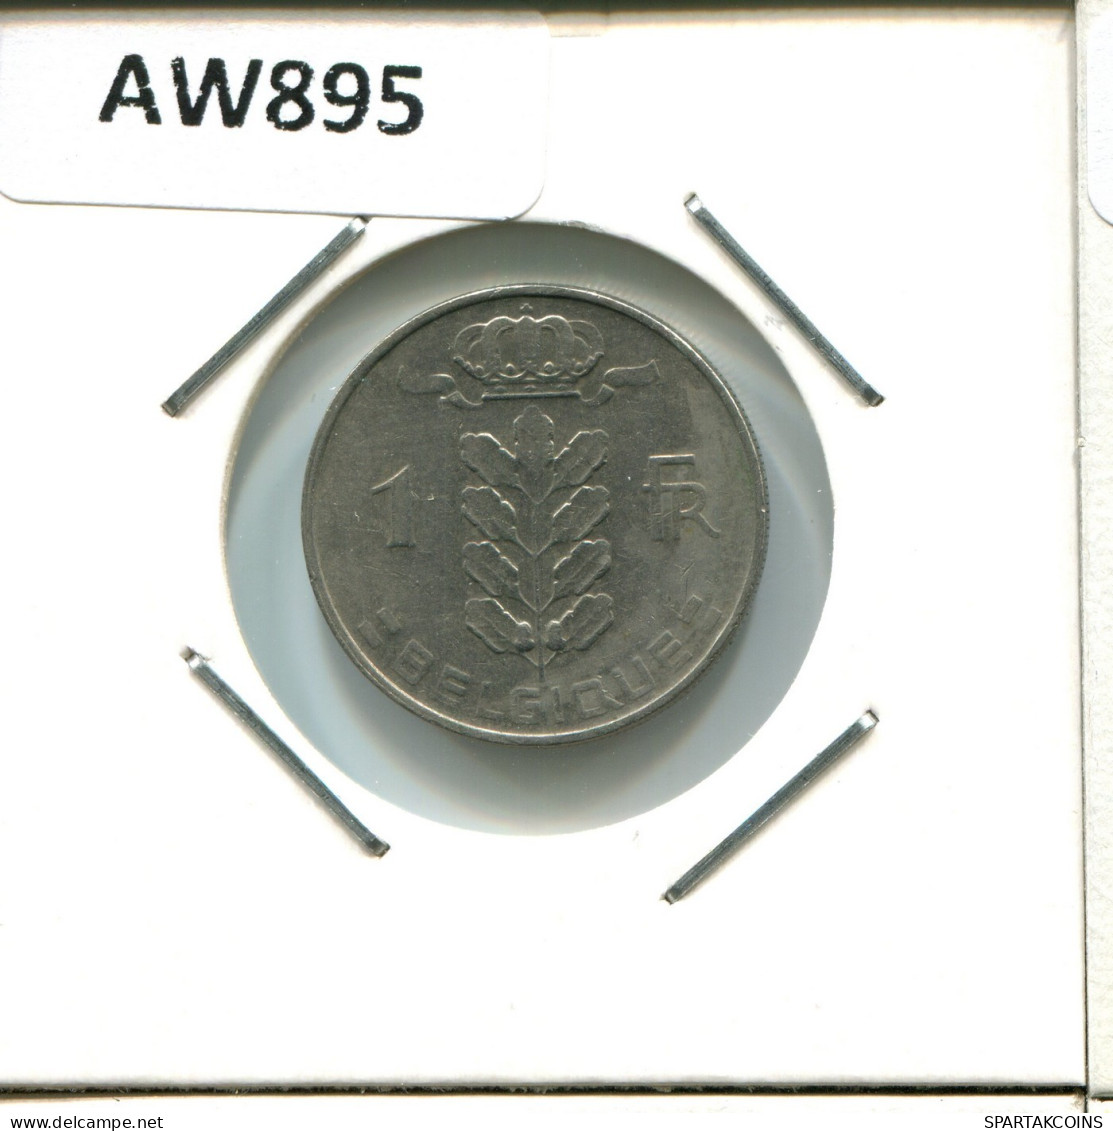 1 FRANC 1969 FRENCH Text BELGIUM Coin #AW895.U.A - 1 Franc